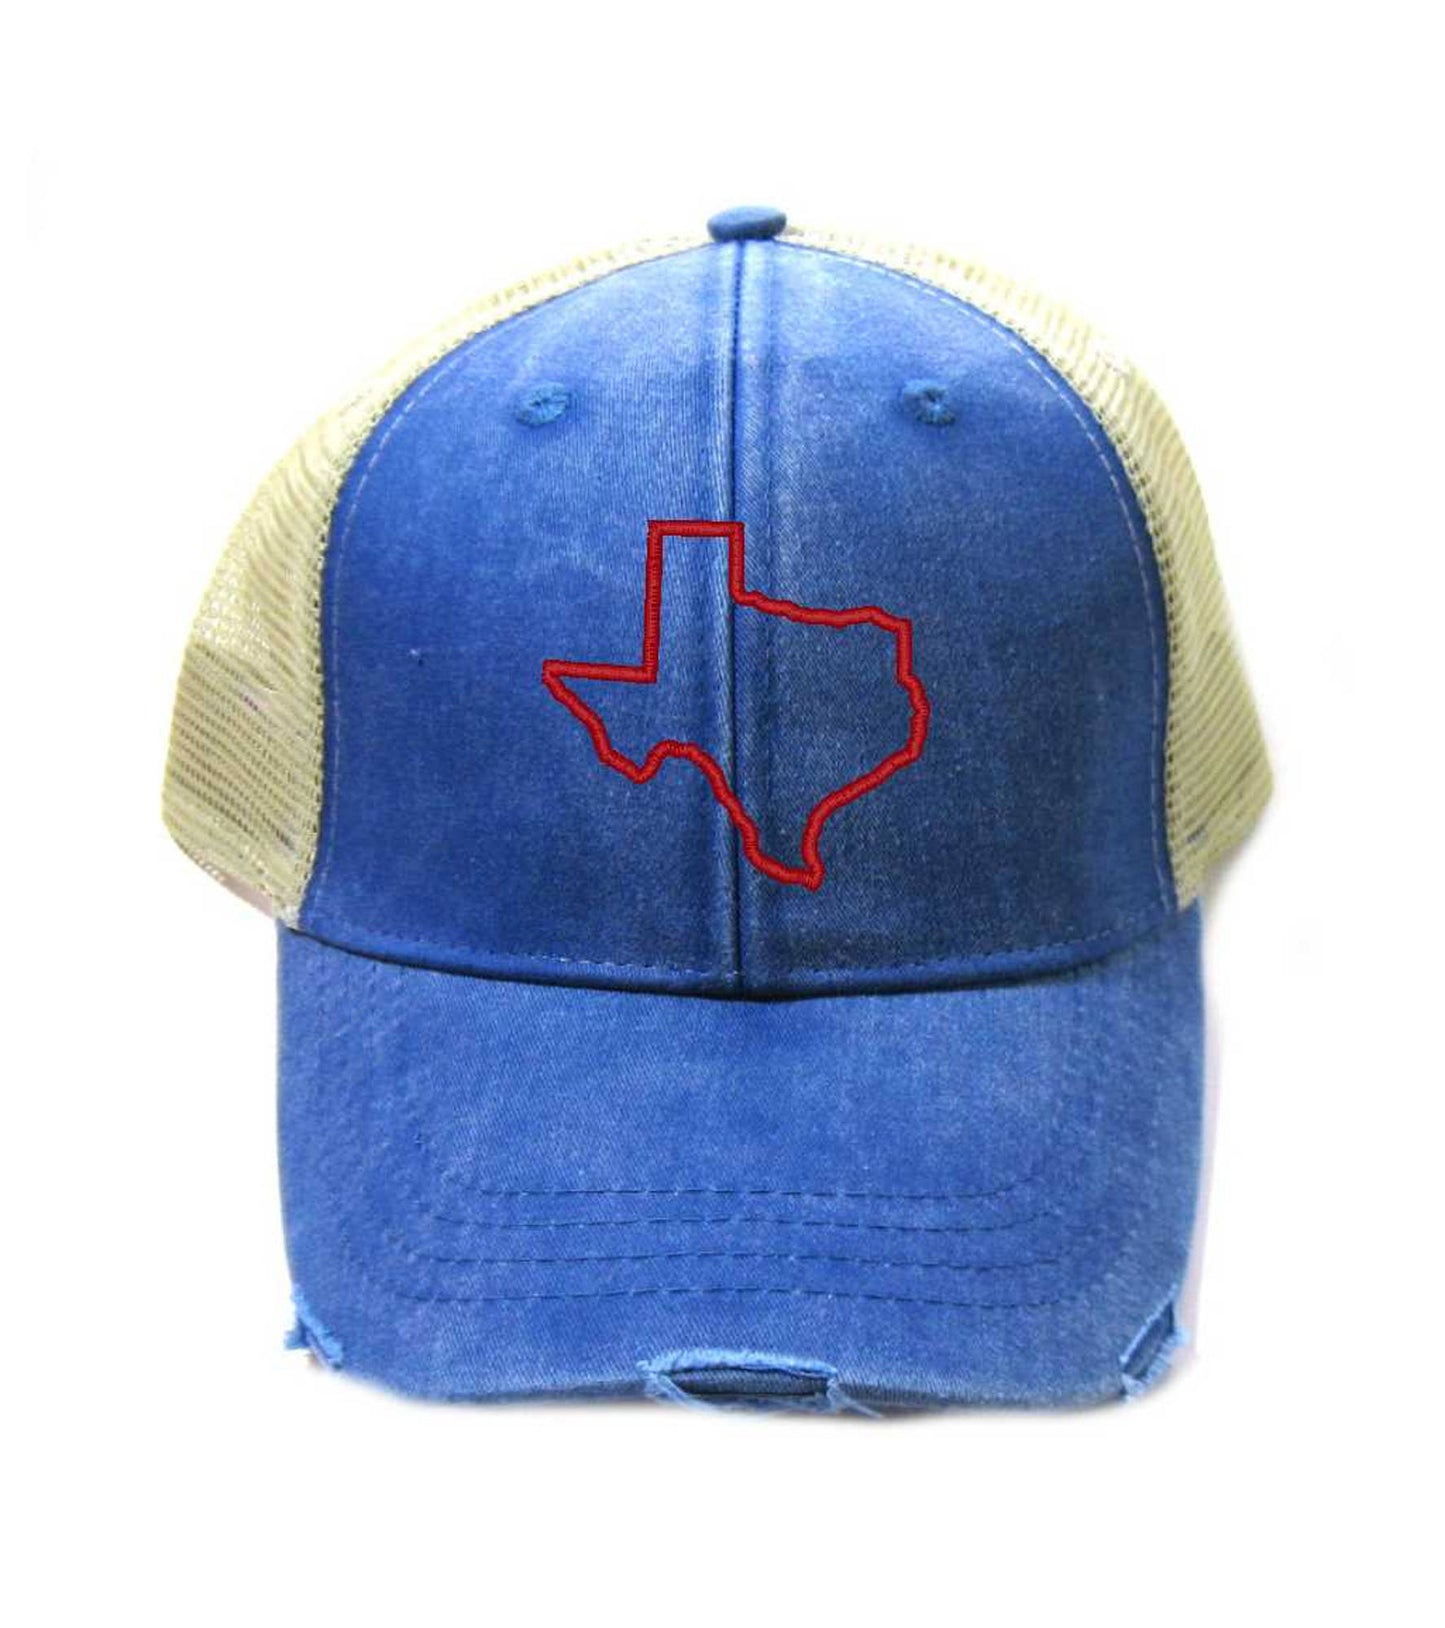 Texas Hat - Distressed Snapback Trucker Hat - Texas State Outline - Many Colors Available